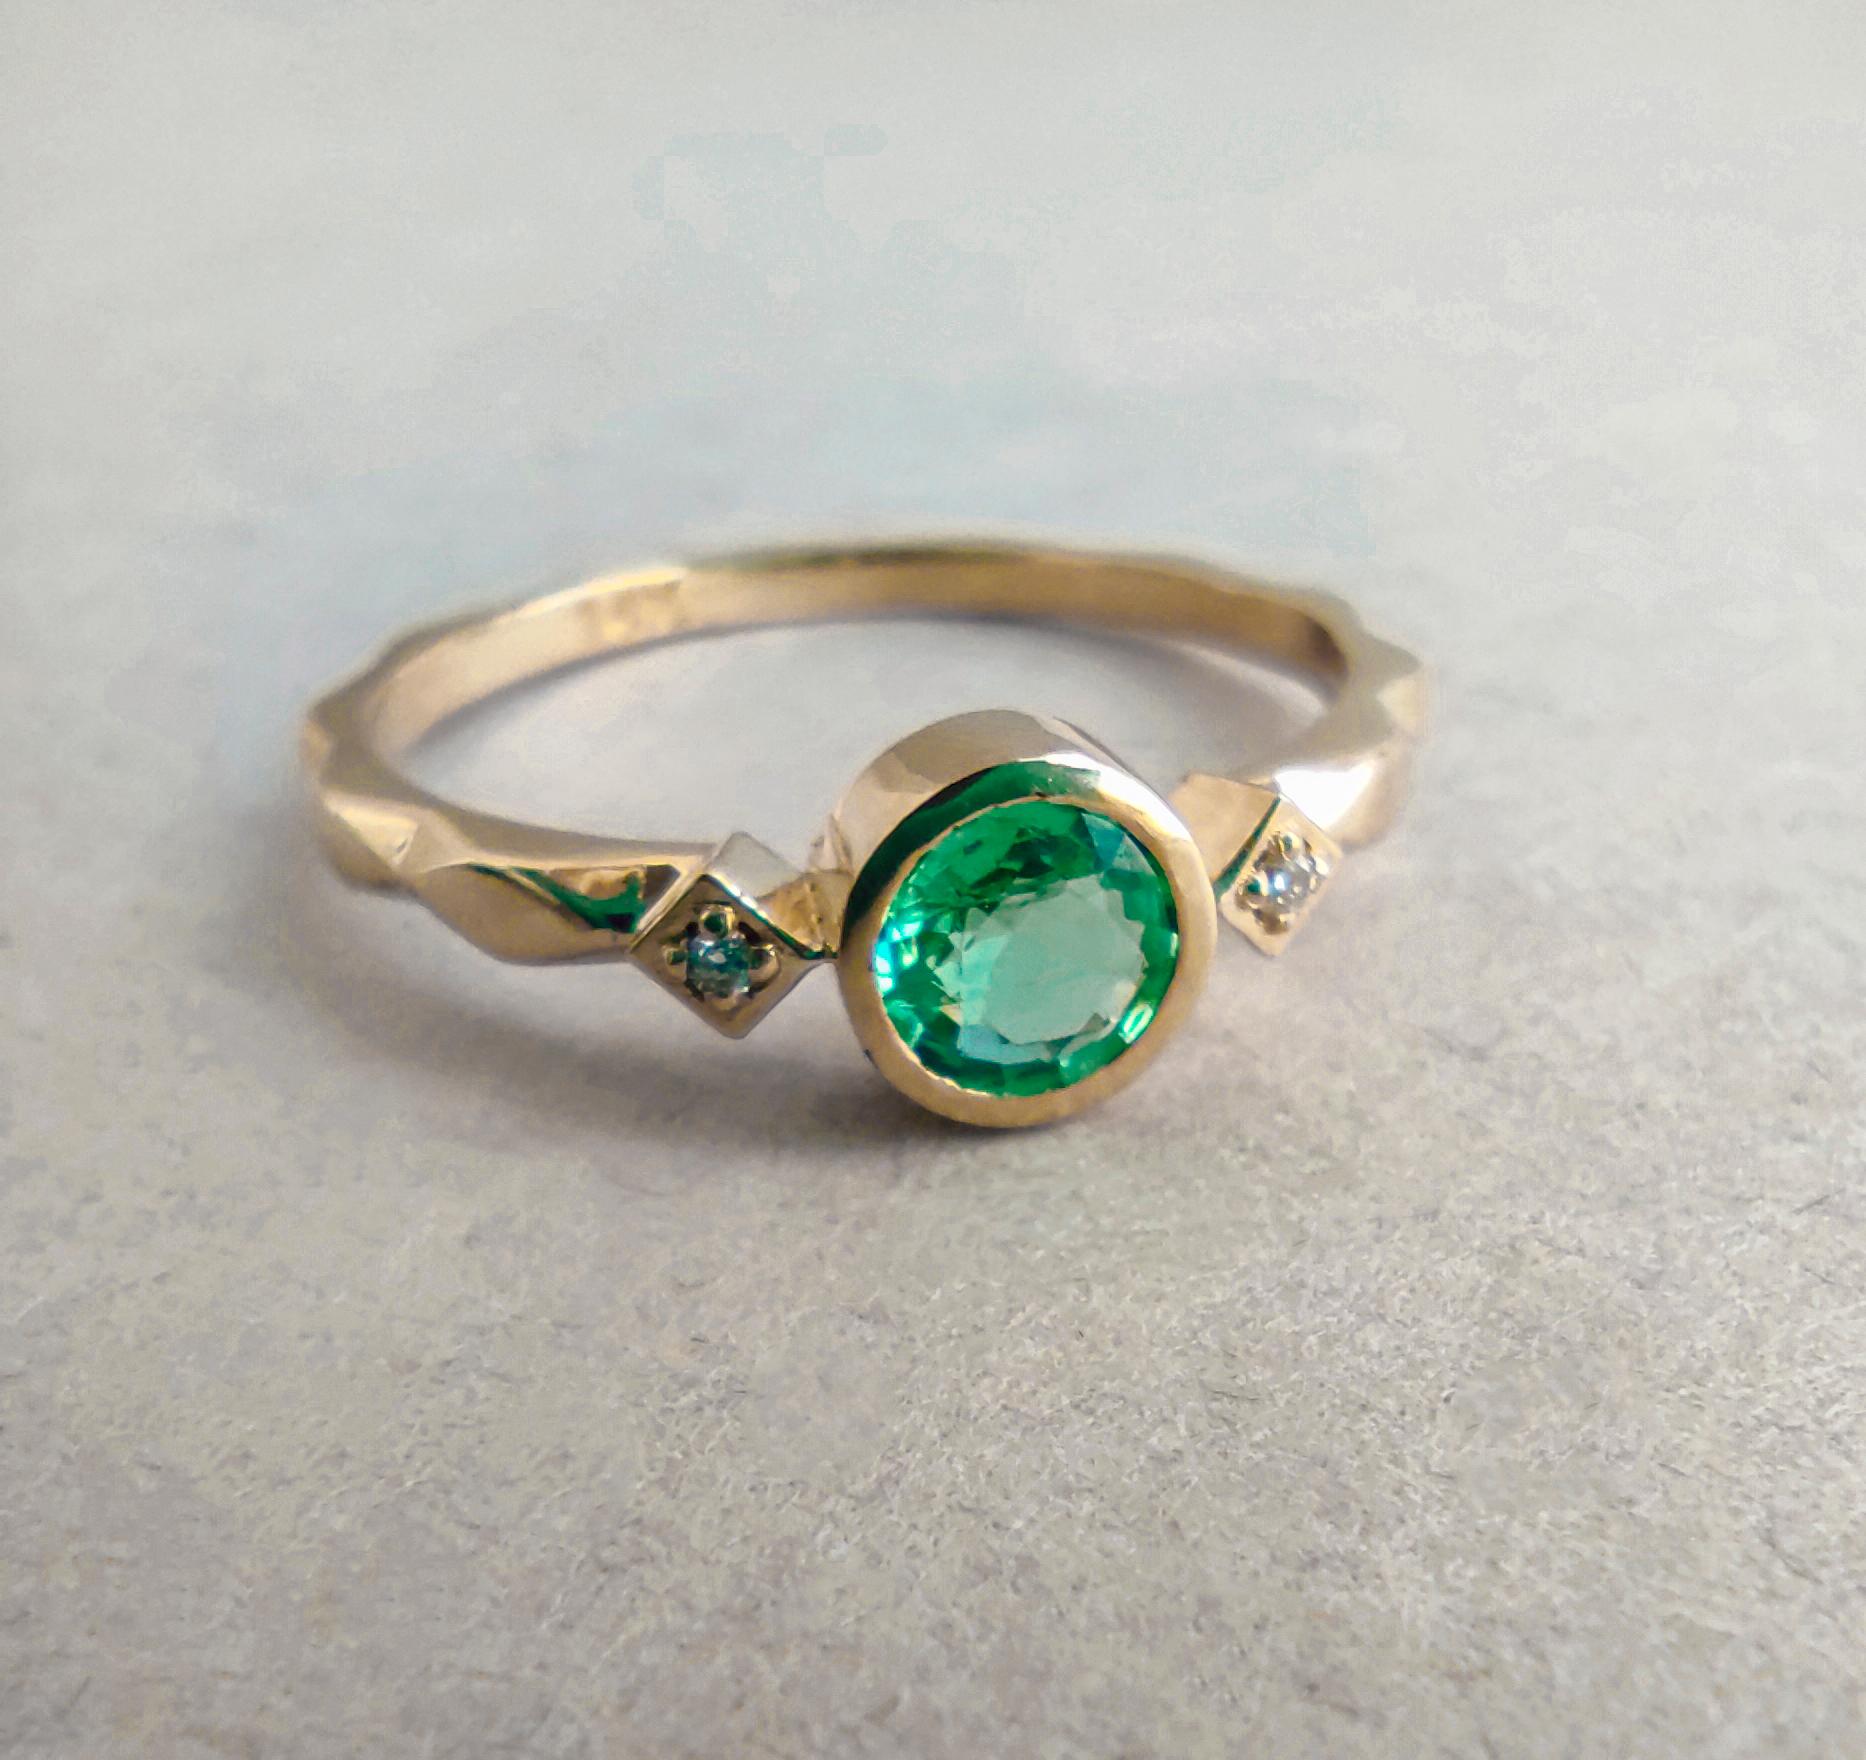 For Sale:  Round Emerald Ring in 14k Gold, Genuine Emerald Ring 3